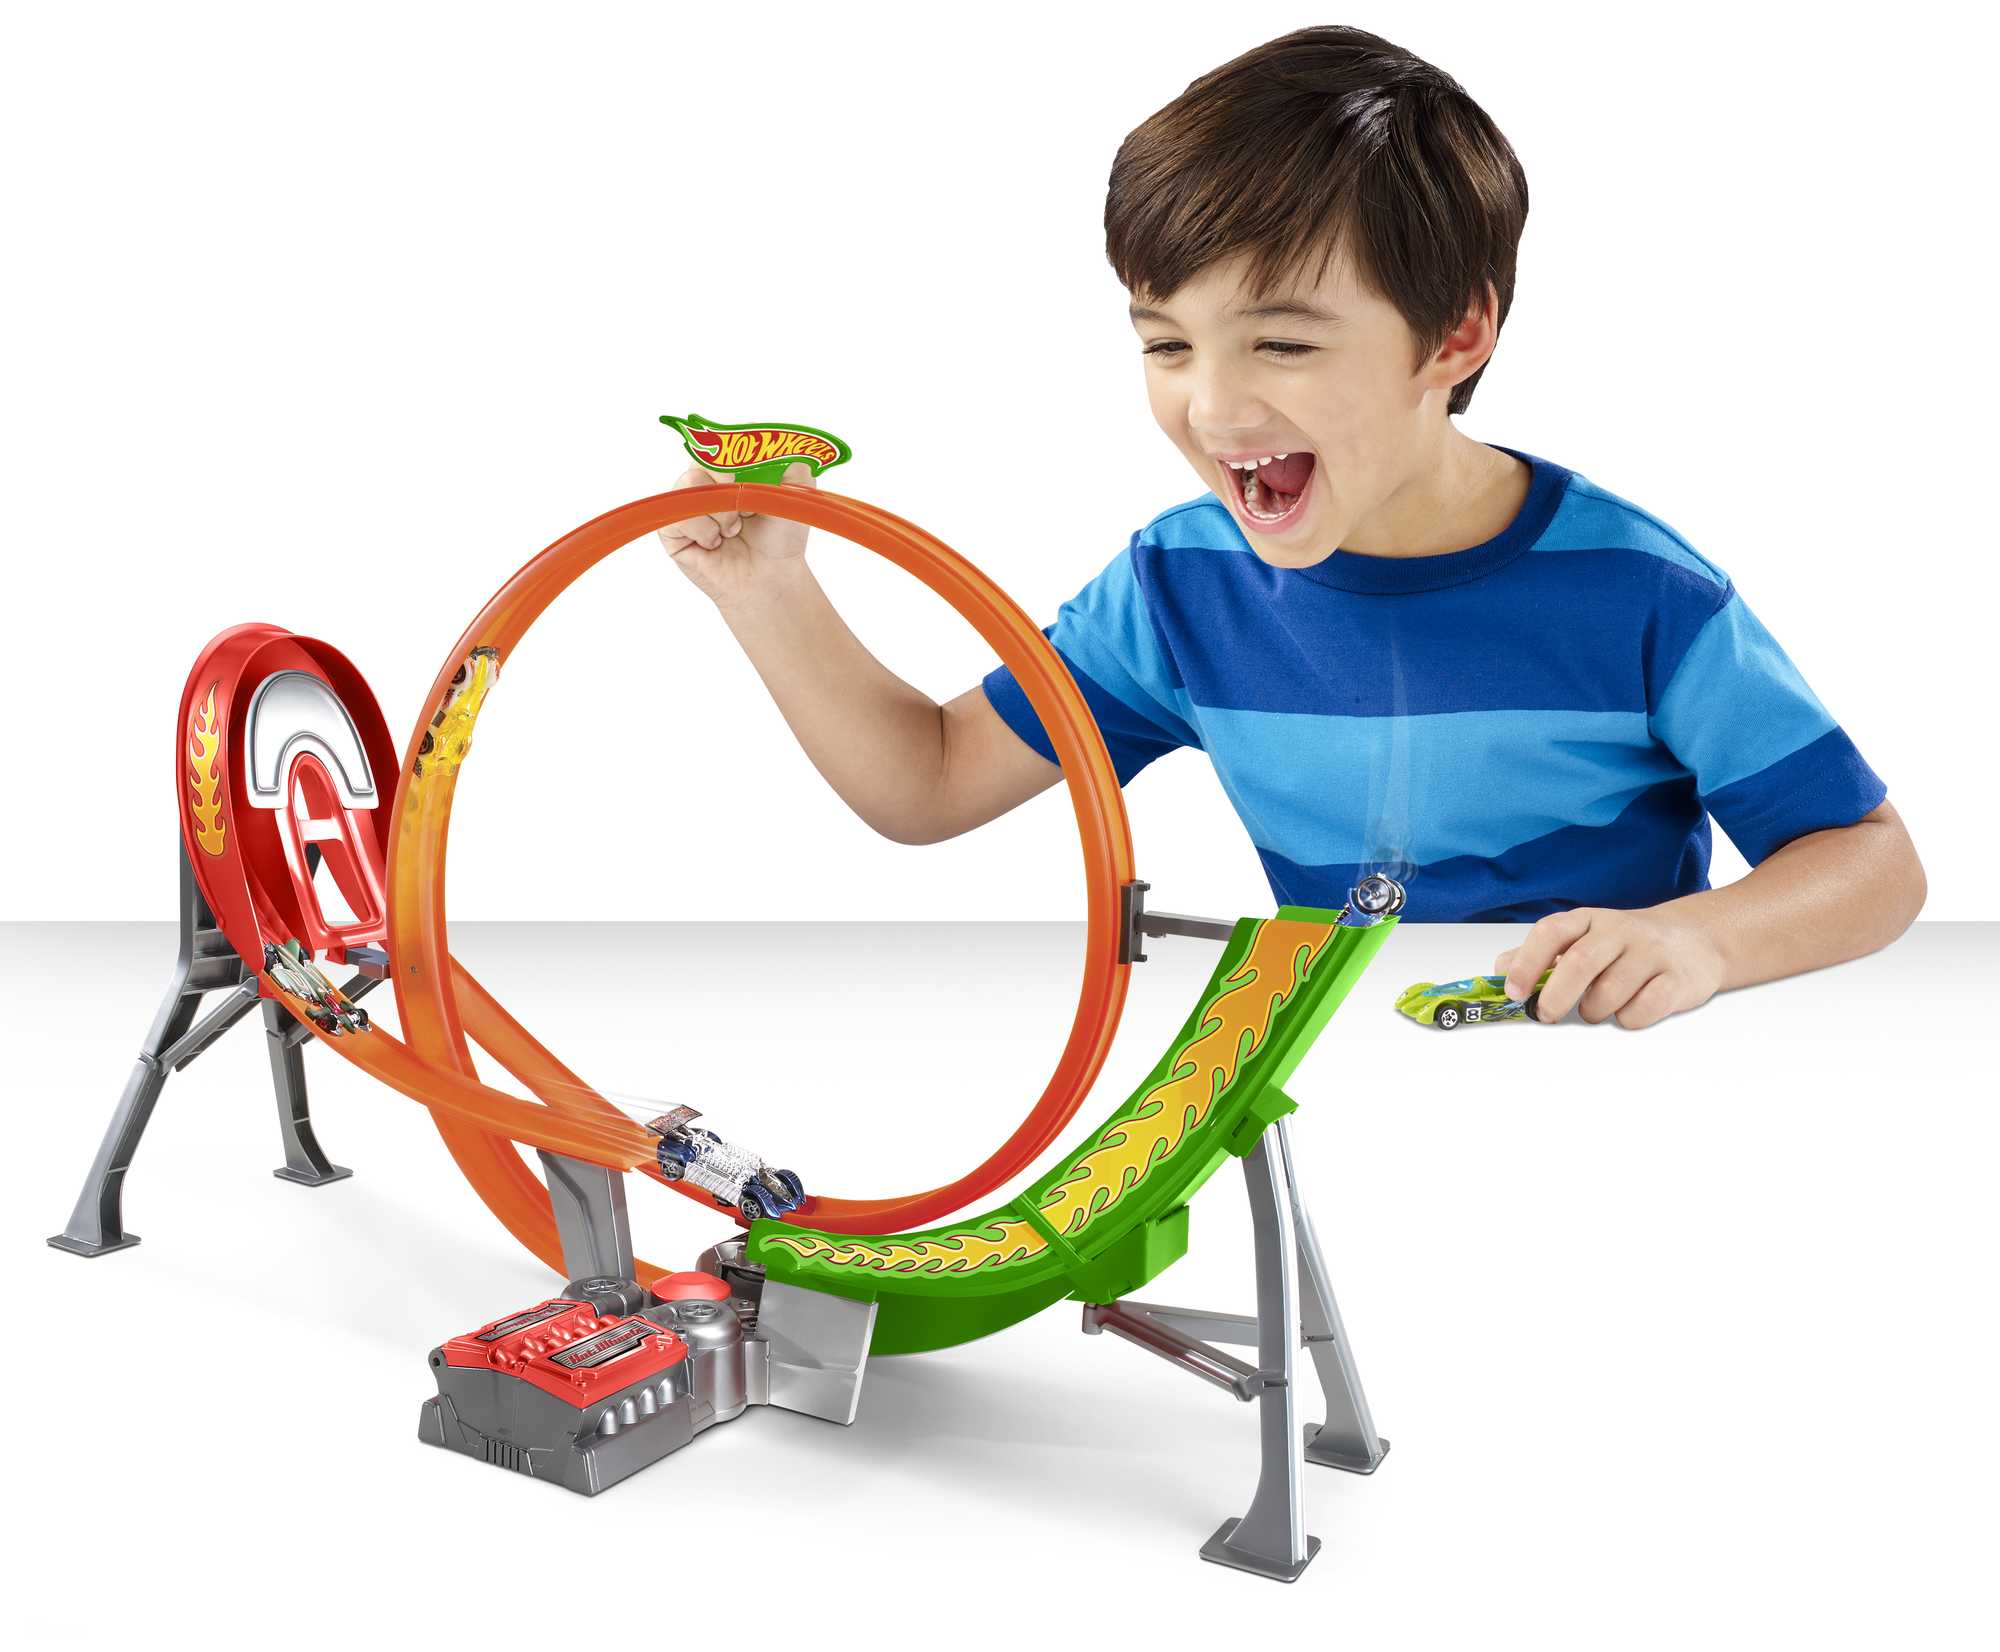 Hot Wheels Action Power Shift Motorized Raceway Track Set, Includes 5 Cars in 1:64 Scale - image 3 of 7